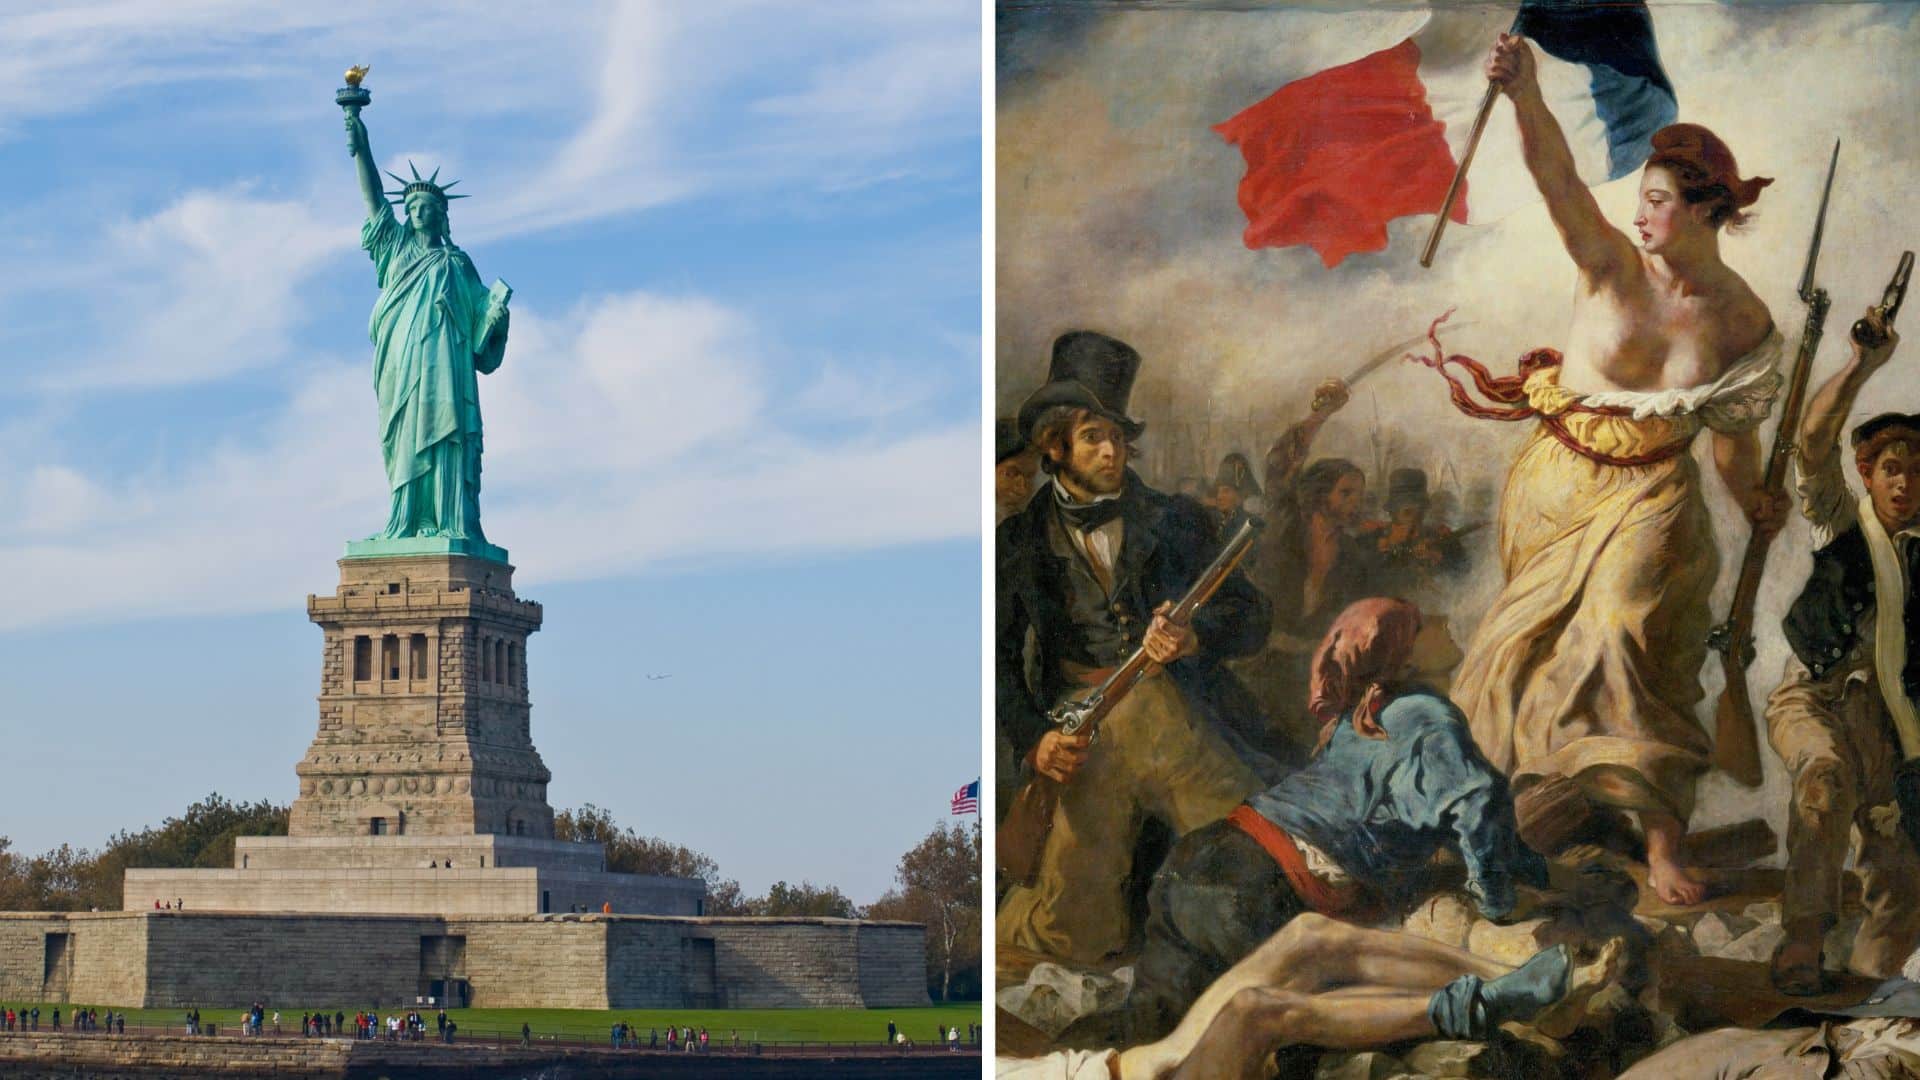 Collage | Links: Statue of Liberty (more formally, Liberty Enlightening the World, and more colloquially, Lady Liberty) (William Warby, CC BY 2.0 https://creativecommons.org/licenses/by/2.0, via Wikimedia Commons) | Rechts: Die Freiheit führt das Volk (Eugène Delacroix) (Public domain, via Wikimedia Commons)